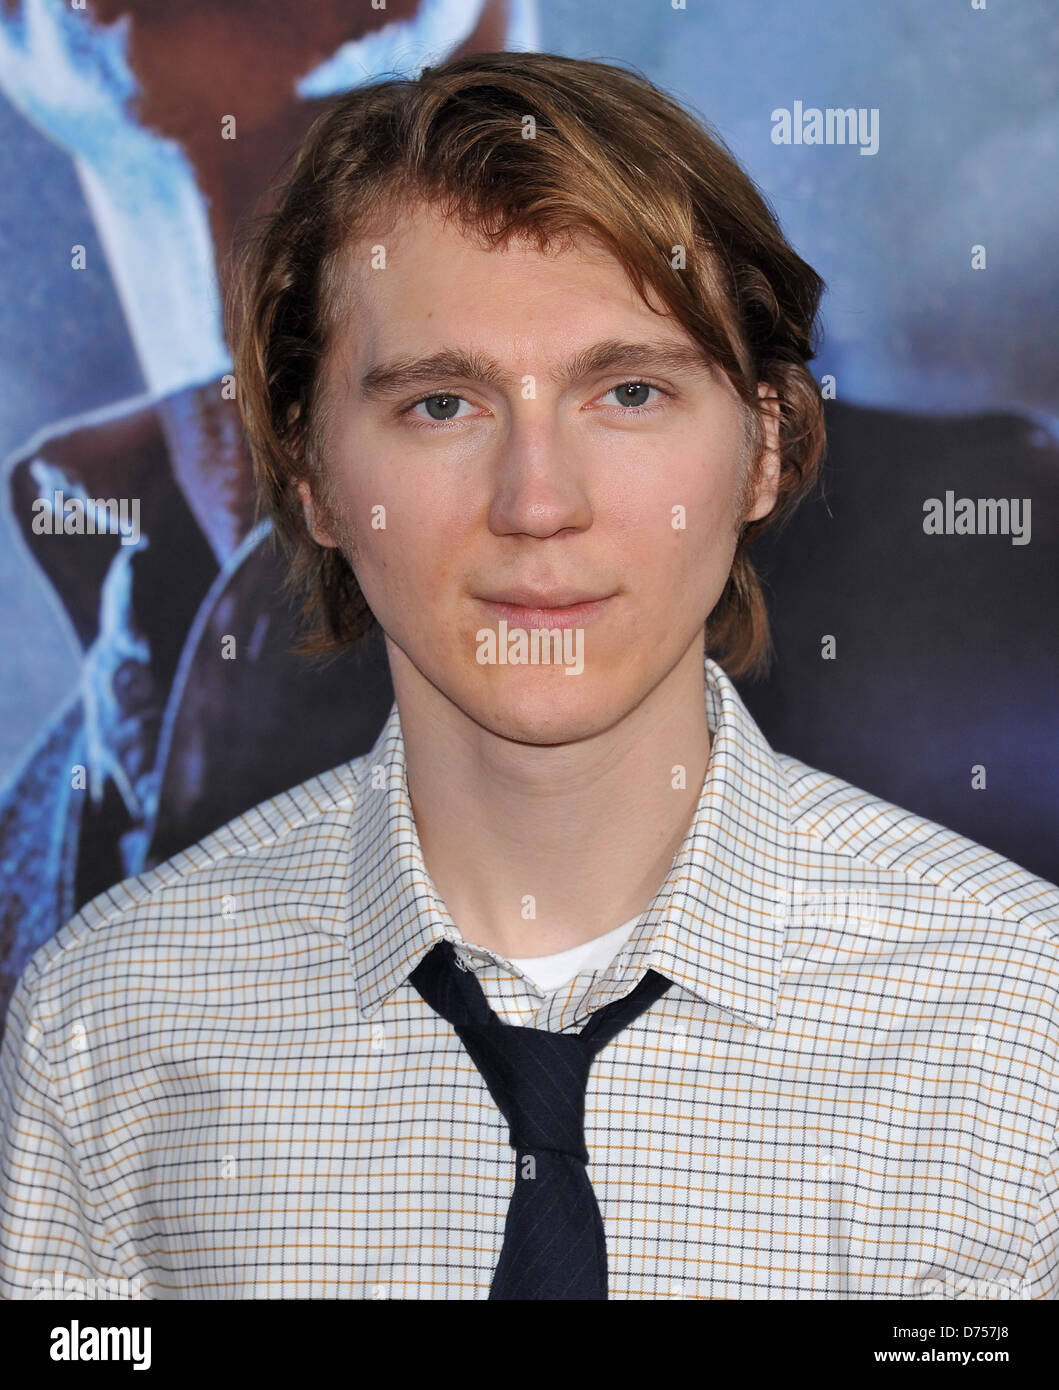 Paul Dano 'Cowboys and Aliens' Premiere at Civic Theater - Arrivals San Diego, California - 23.07.11 Stock Photo